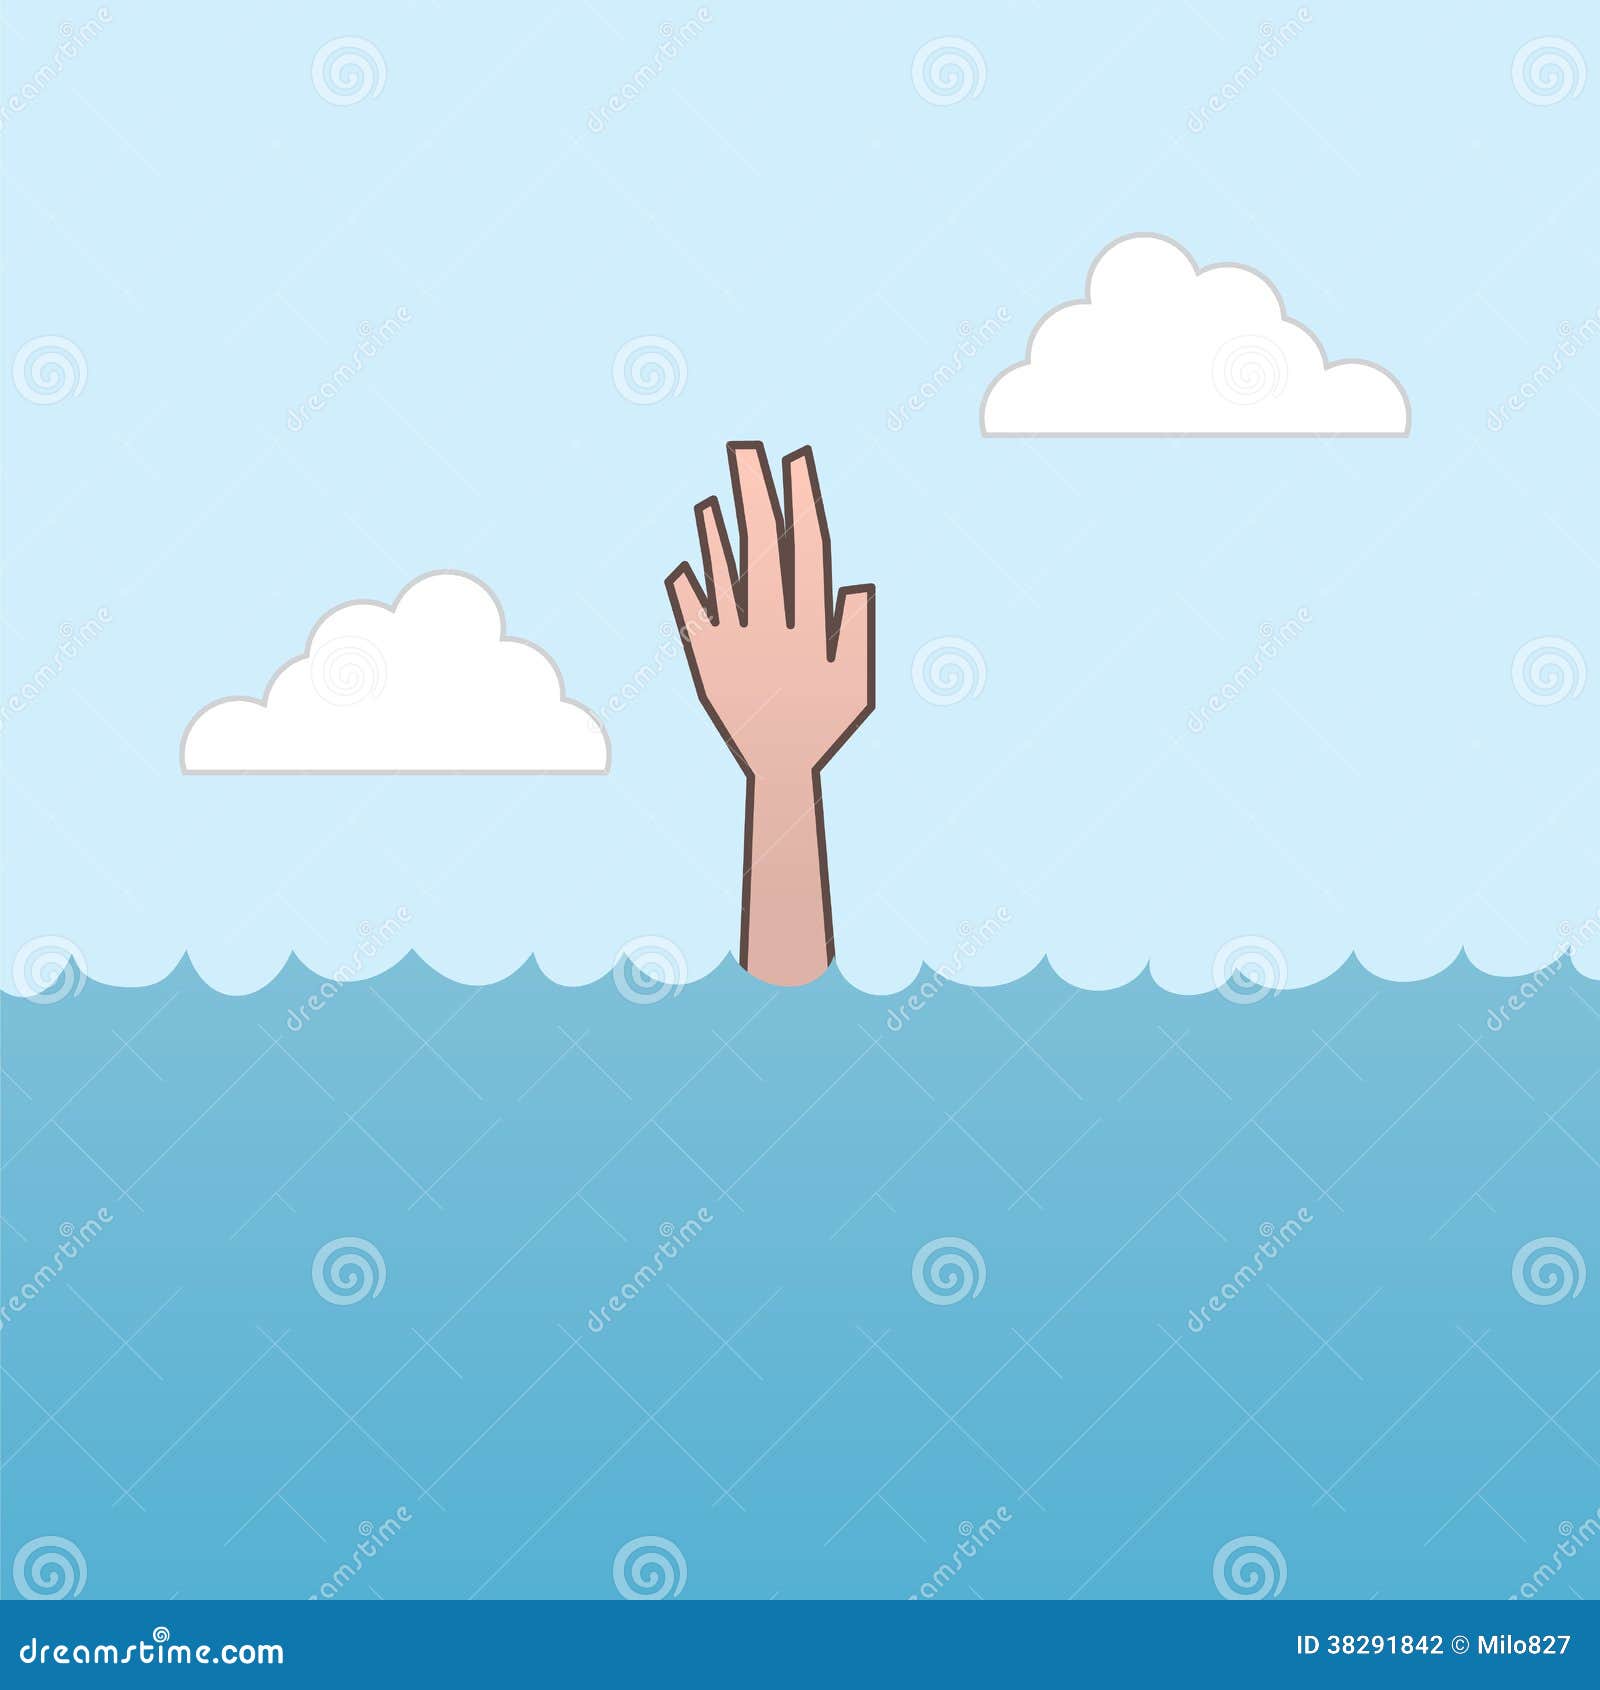 Drowning Hand Reaching stock vector. Illustration of vulnerable - 38291842